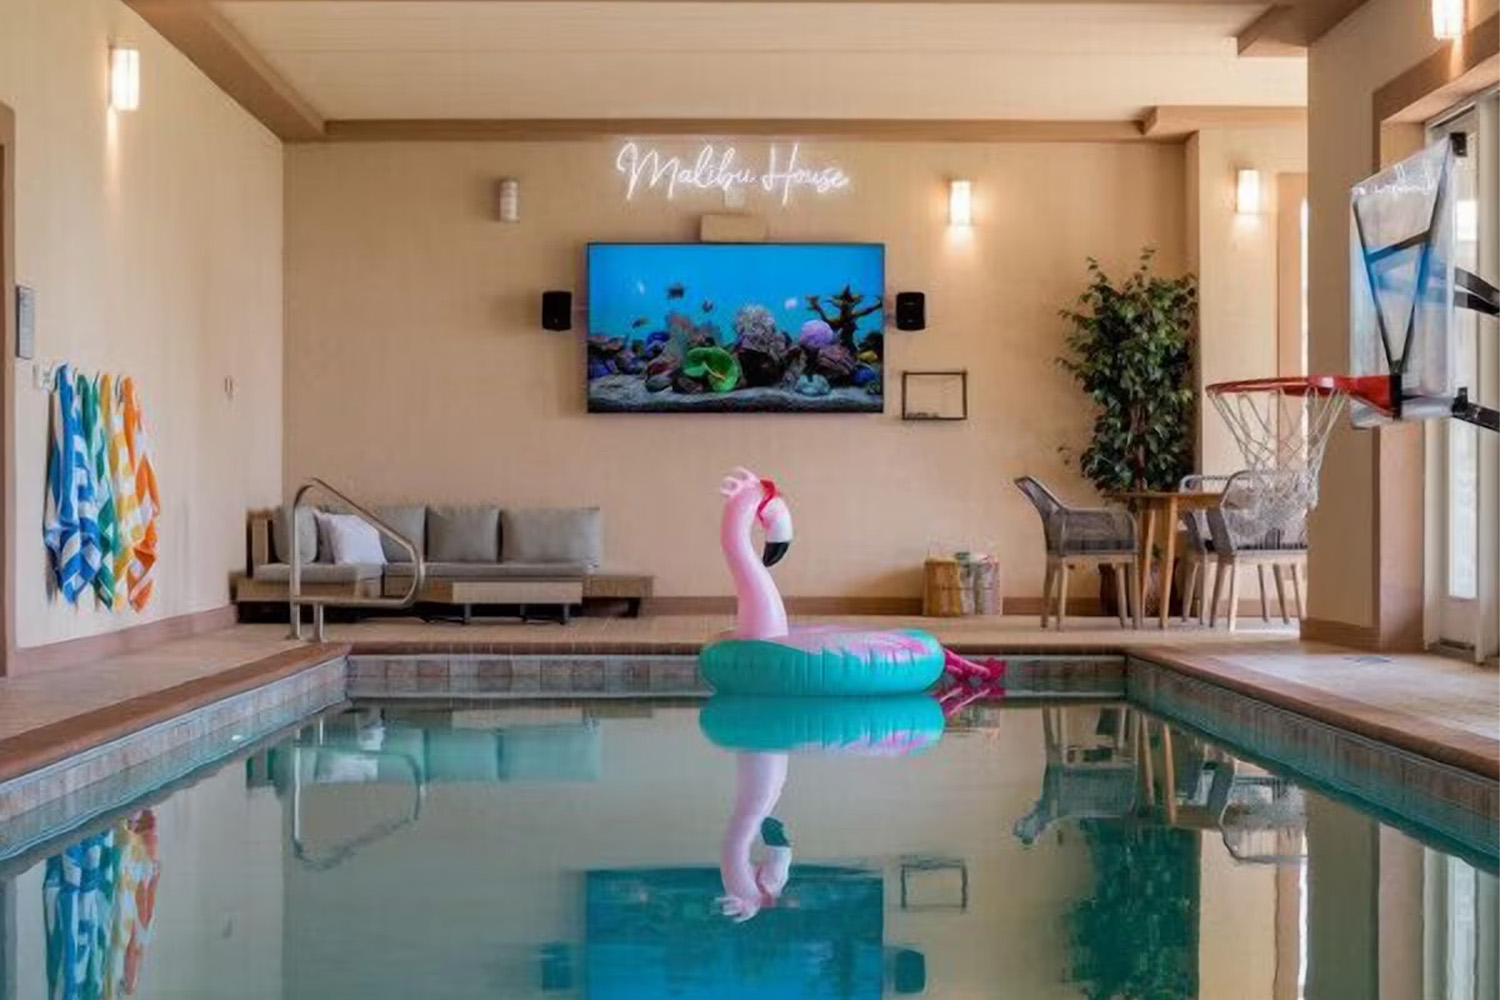 Indoor pool in a lounge area with couches and a TV